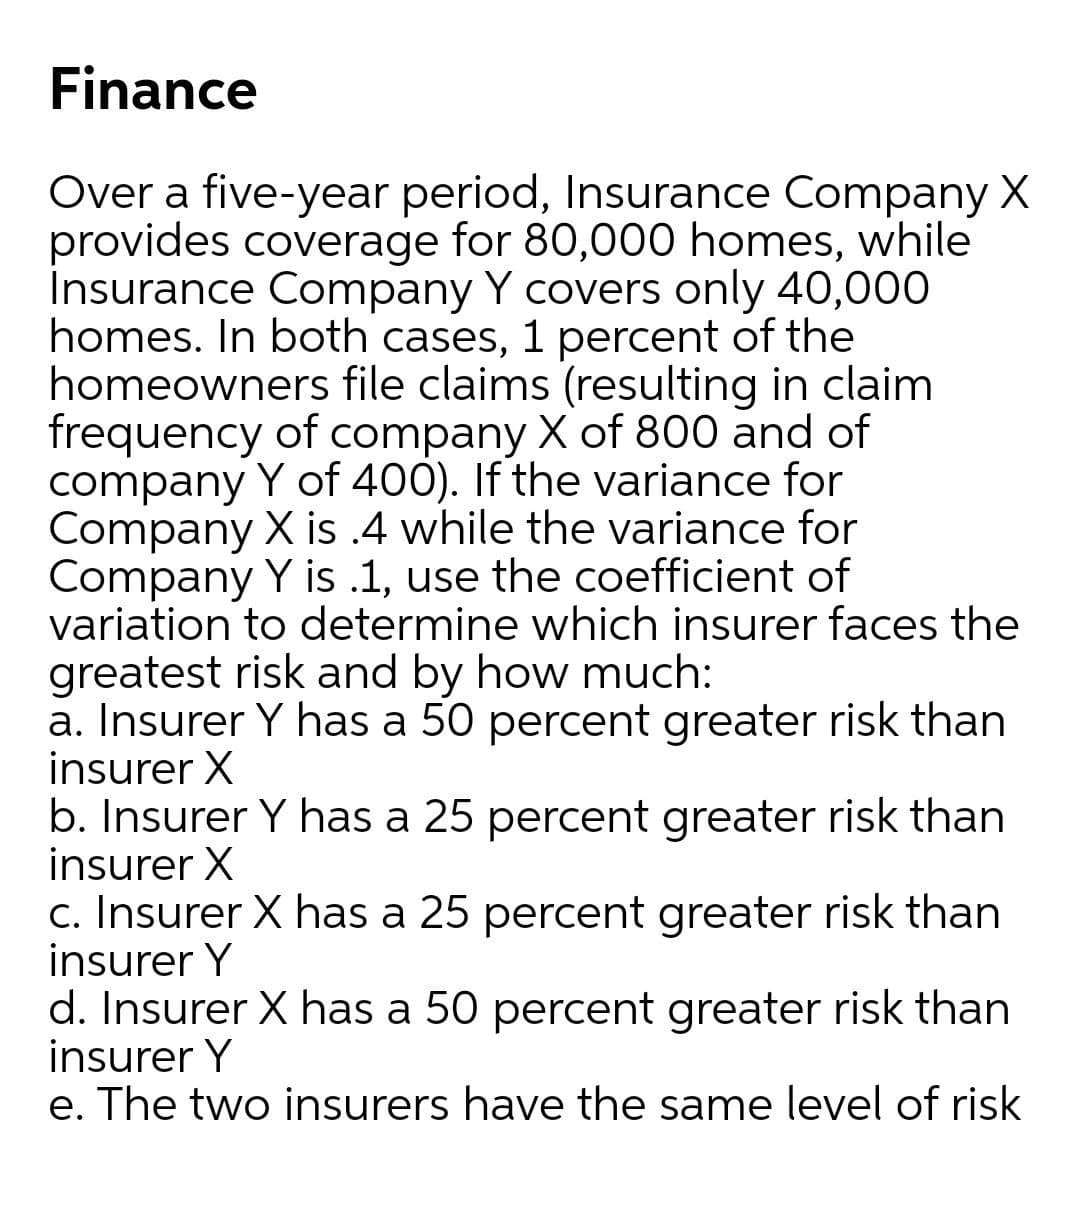 Finance
Over a five-year period, Insurance Company X
provides coverage for 80,000 homes, while
Insurance Company Y covers only 40,000
homes. In both cases, 1 percent of the
homeowners file claims (resulting in claim
frequency of company X of 800 and of
company Y of 400). If the variance for
Company X is .4 while the variance for
Company Y is .1, use the coefficient of
variation to determine which insurer faces the
greatest risk and by how much:
a. Insurer Y has a 50 percent greater risk than
insurer X
b. Insurer Y has a 25 percent greater risk than
insurer X
c. Insurer X has a 25 percent greater risk than
insurer Y
d. Insurer X has a 50 percent greater risk than
insurer Y
e. The two insurers have the same level of risk
